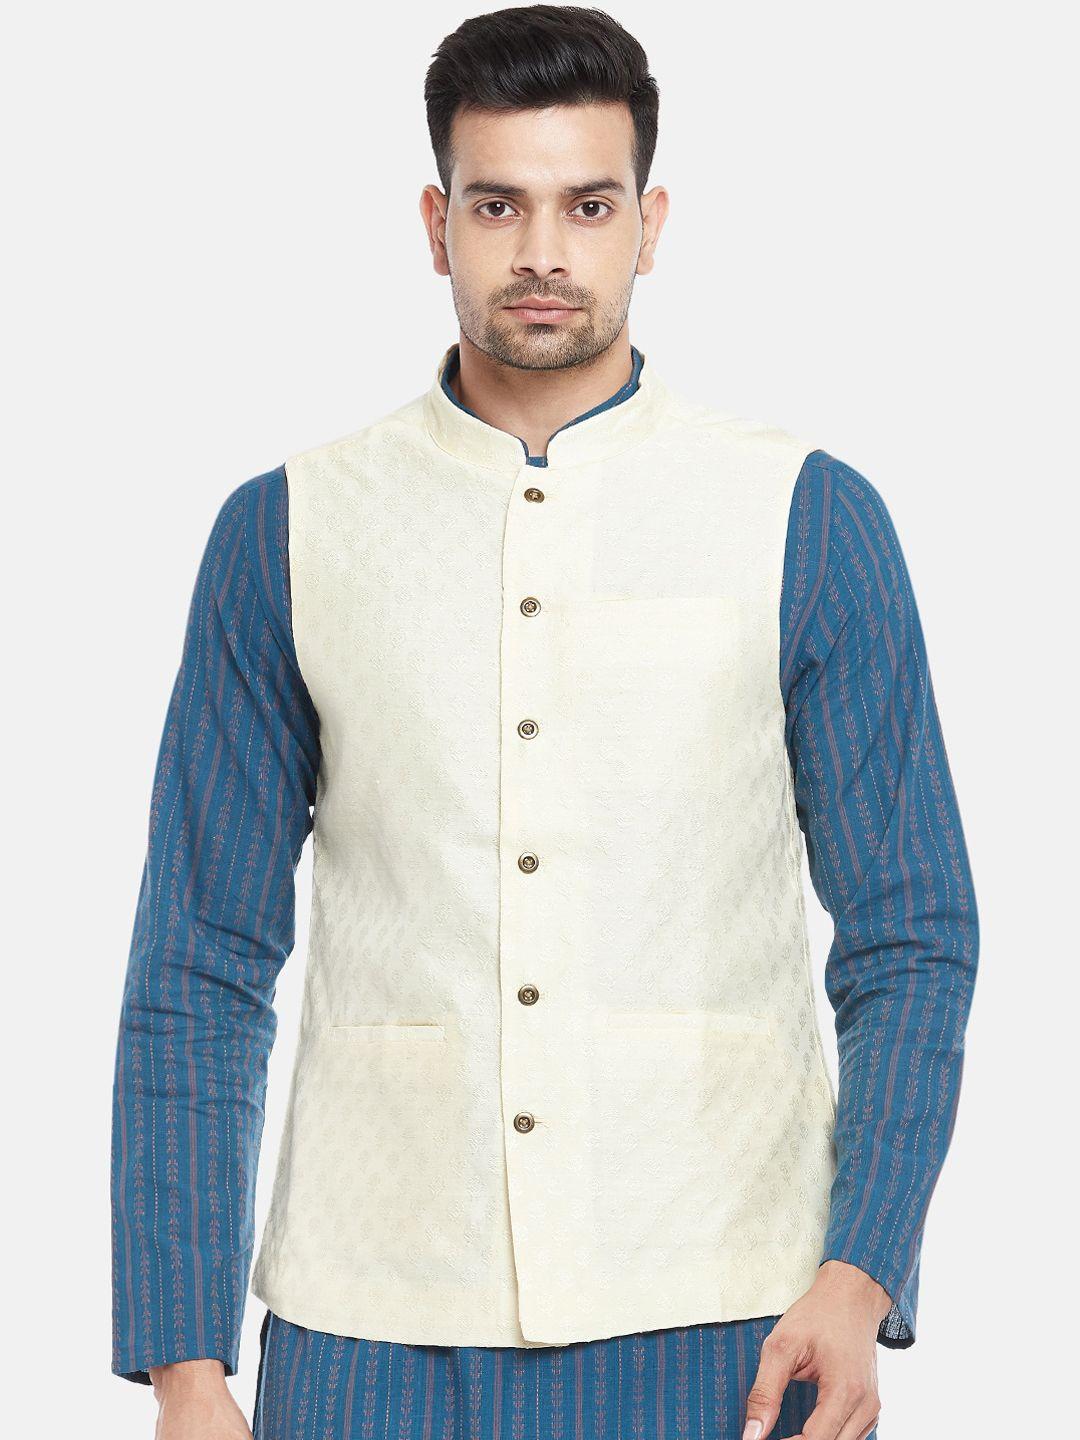 indus route by pantaloons men off white woven design waistcoat